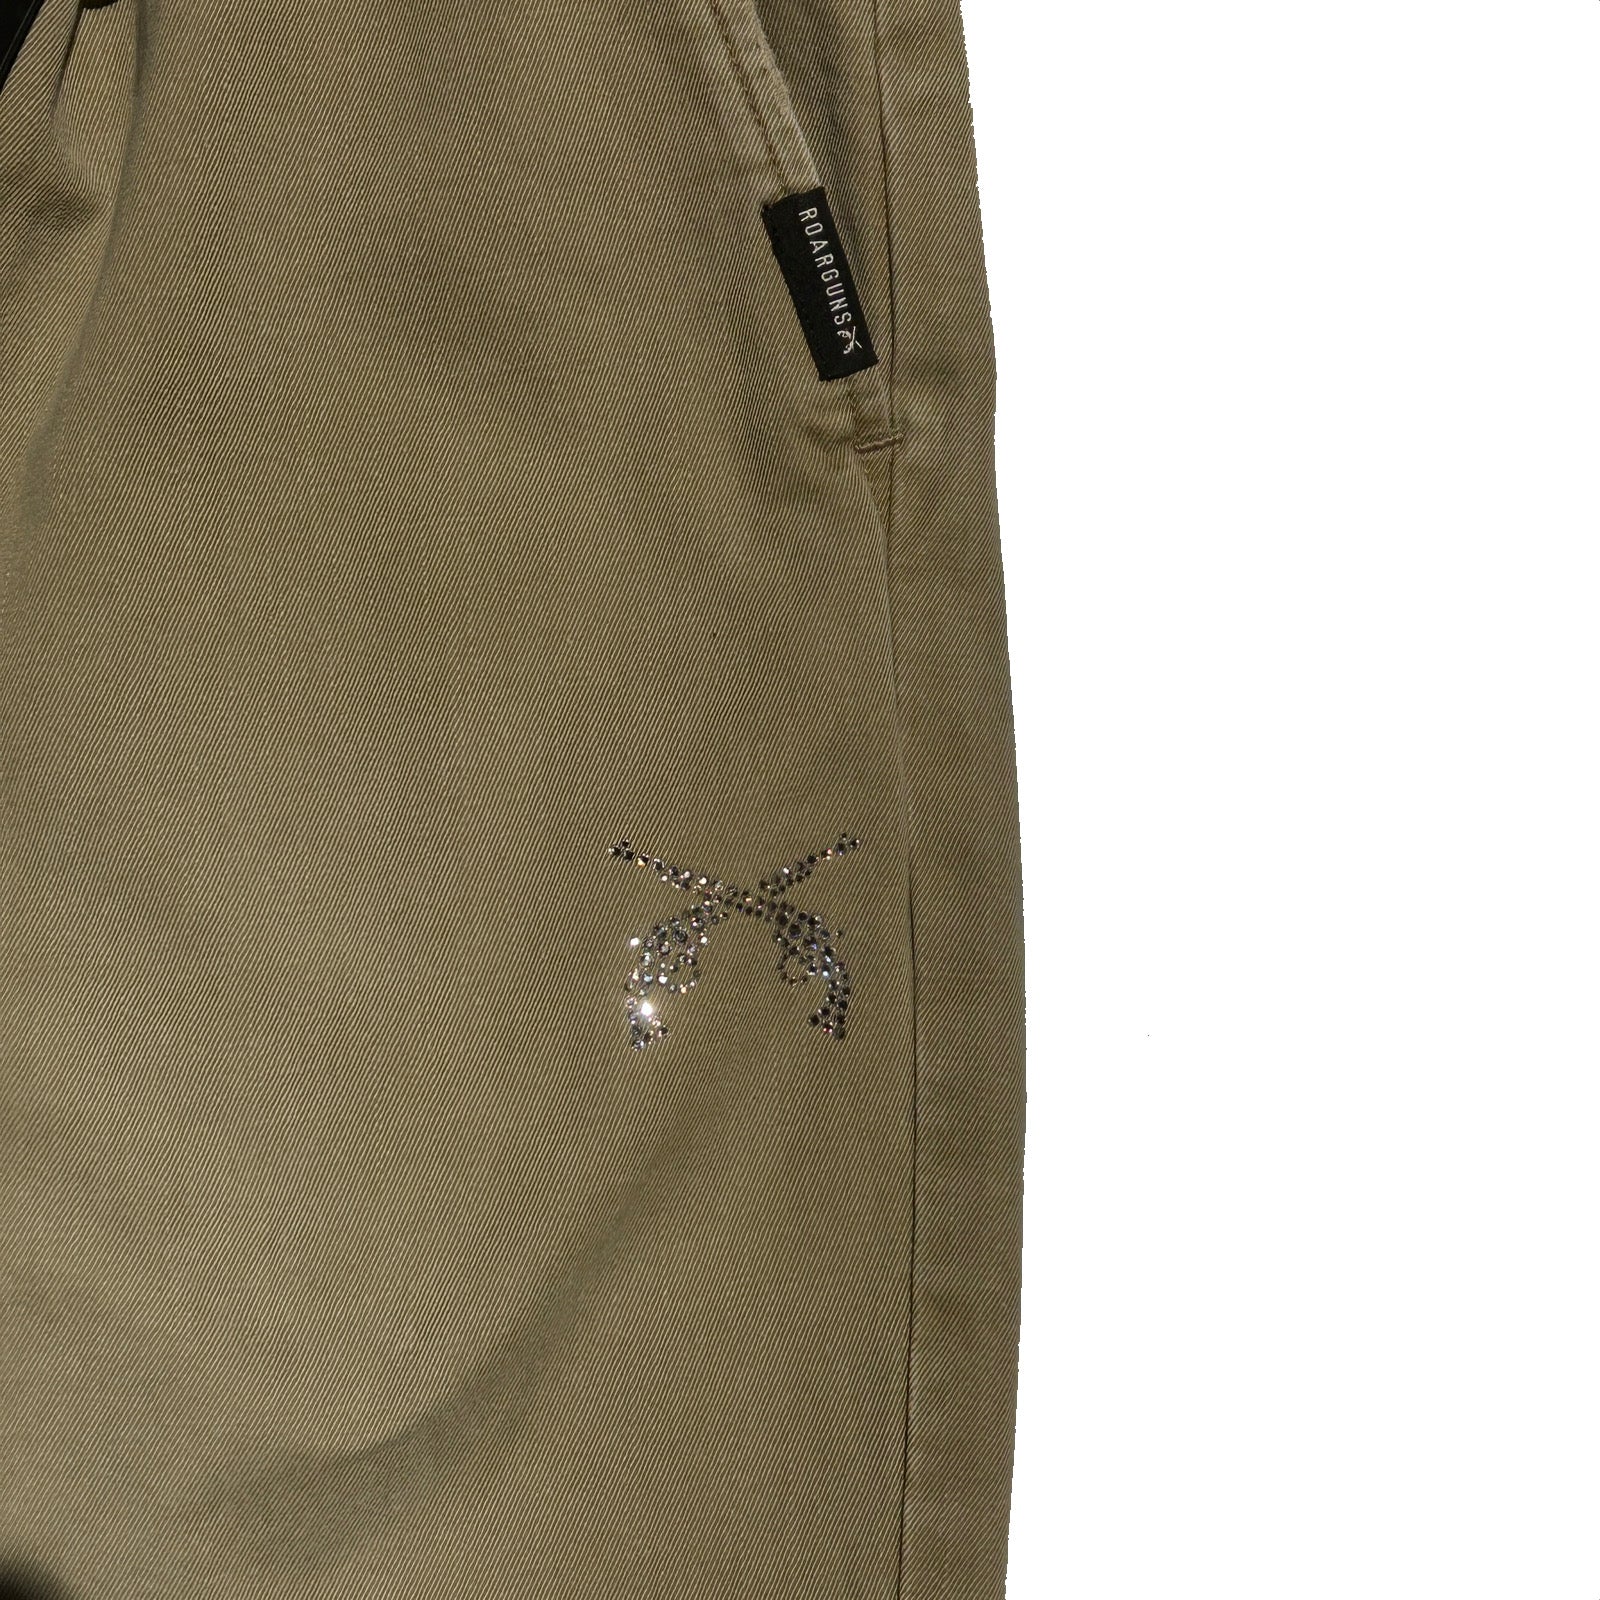 Load image into Gallery viewer, VINTAGE WASH WIDE CHINO PANTS / BEIGE